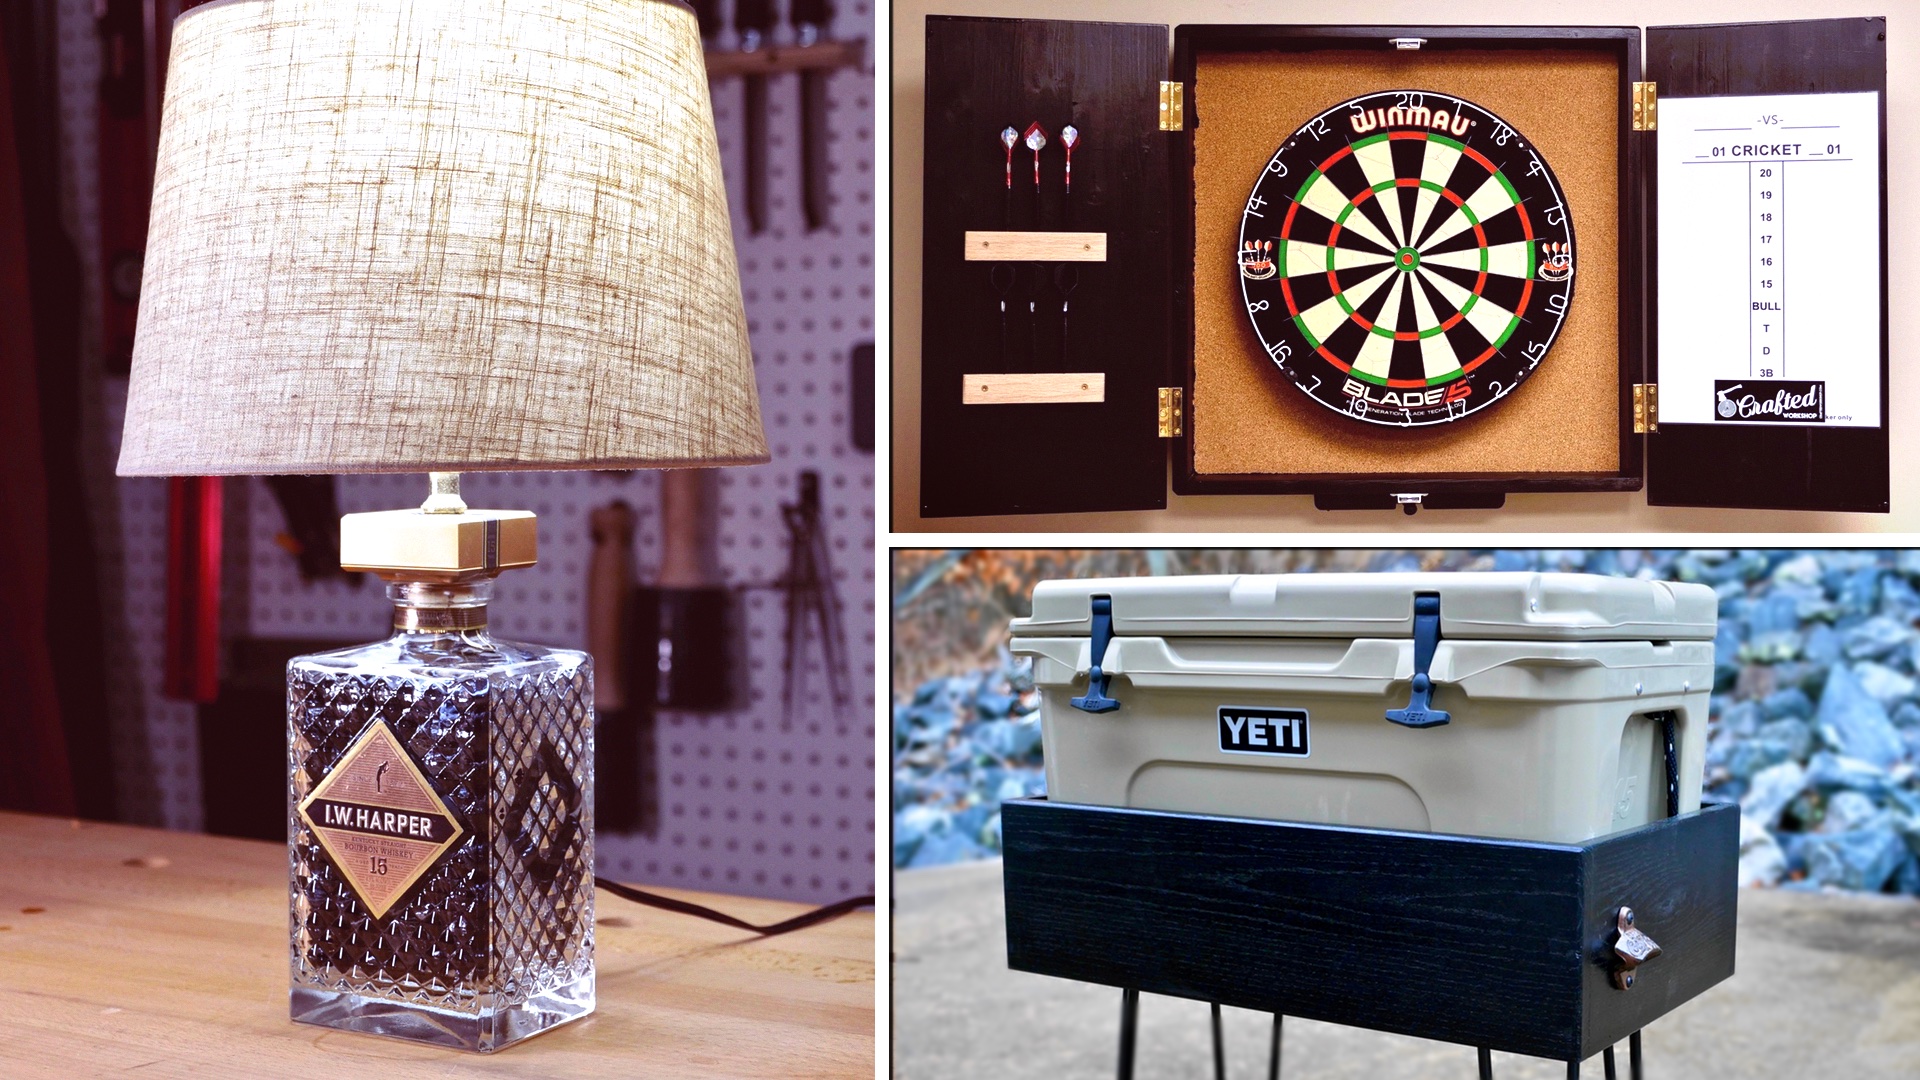 How To Build A Diy Bottle Lamp Dartboard Cabinet Yeti Patio